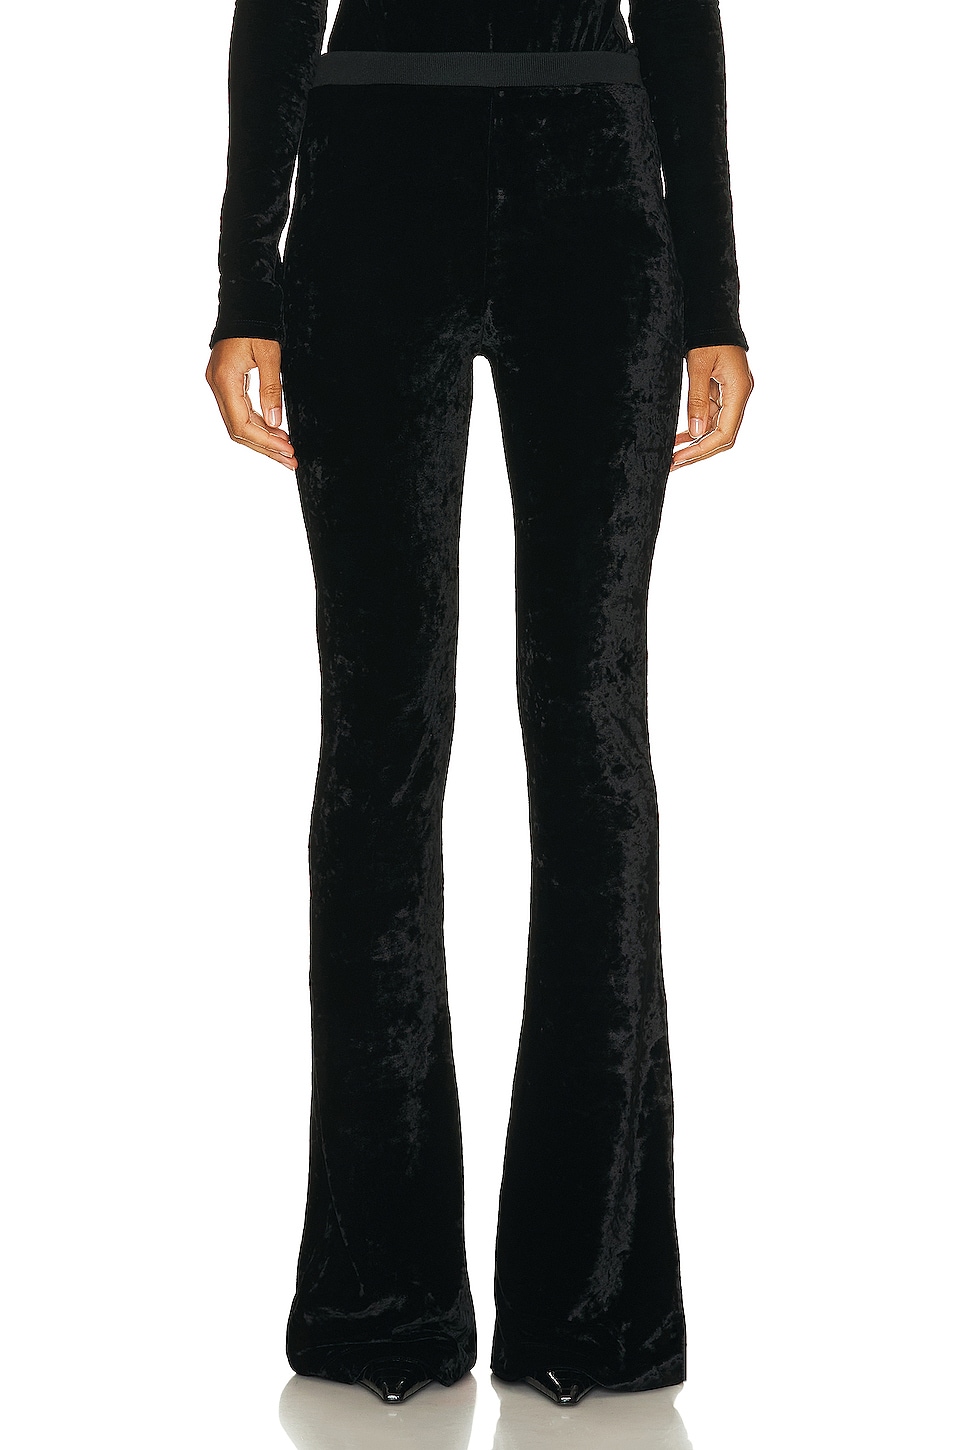 Image 1 of Bally Flare Pant in Black